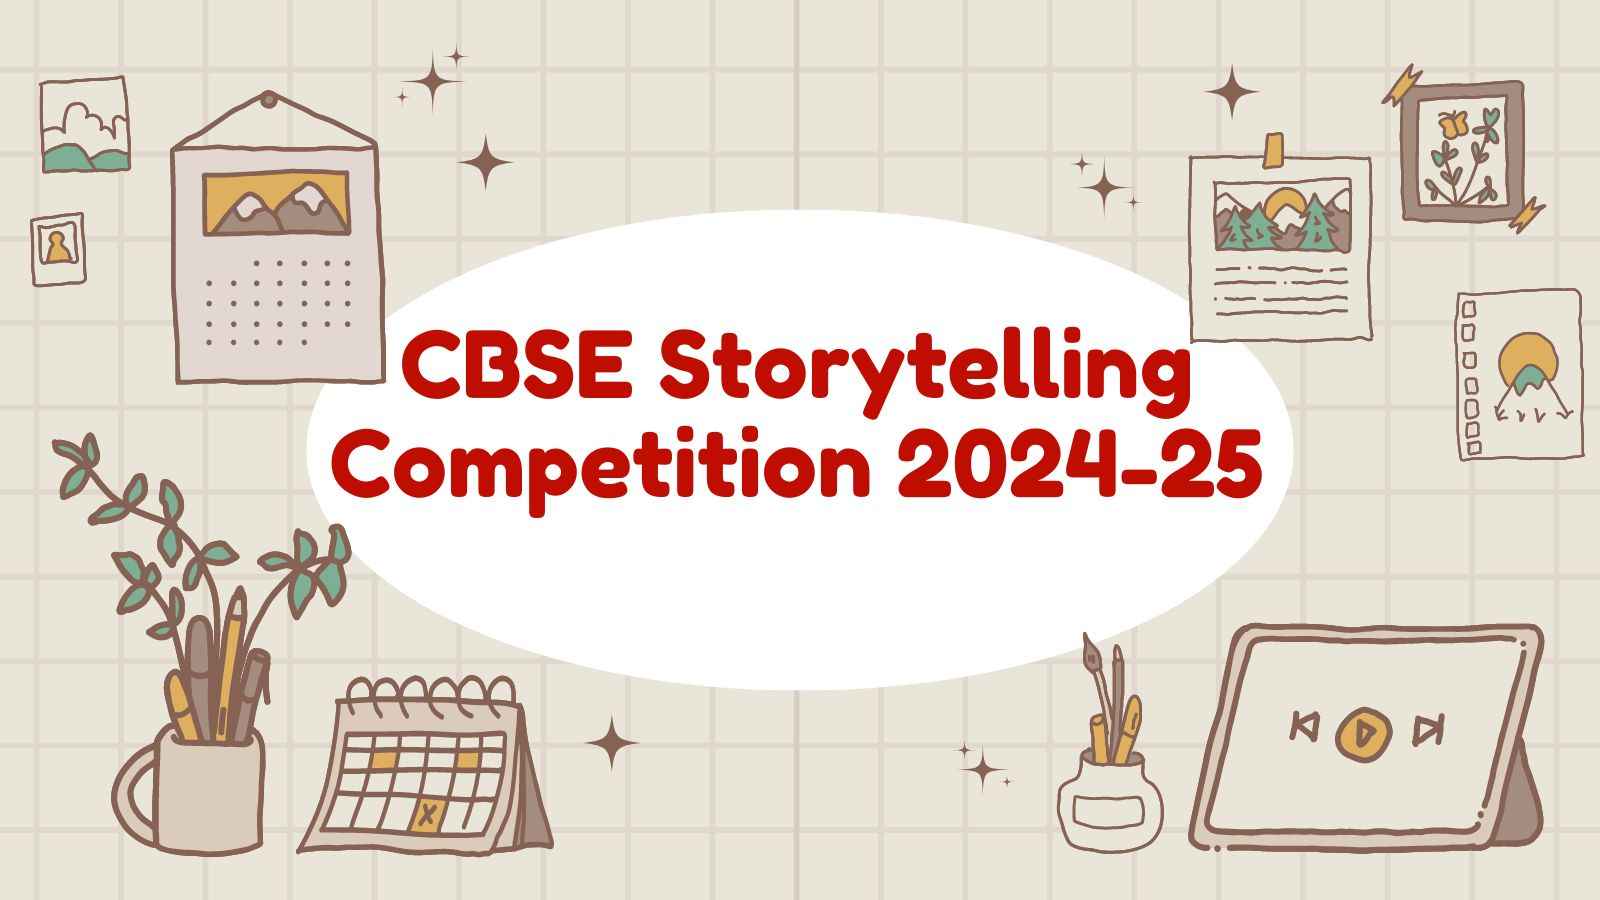 CBSE Storytelling Competition 2024-25: Express Yourself & Gain Recognition!